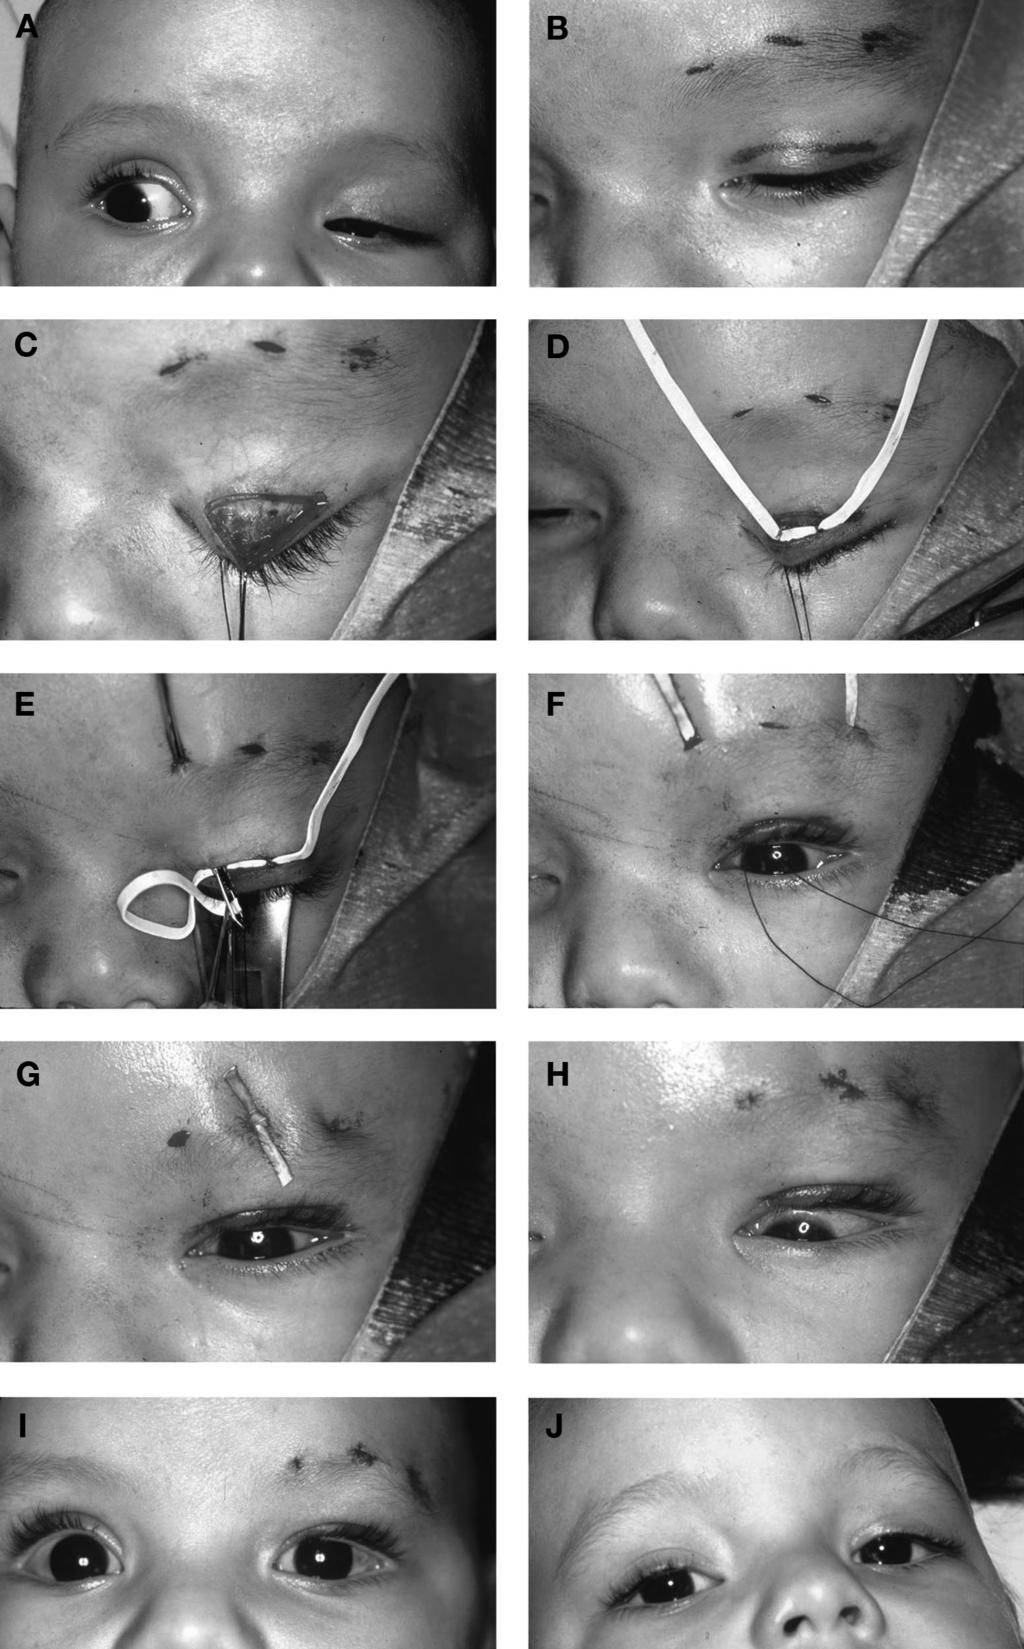 414 R. C. KERSTEN ET AL. FIG. 1. A, Three-month-old child with severe poor-function left upper eyelid ptosis thought to be at risk for amblyopia.